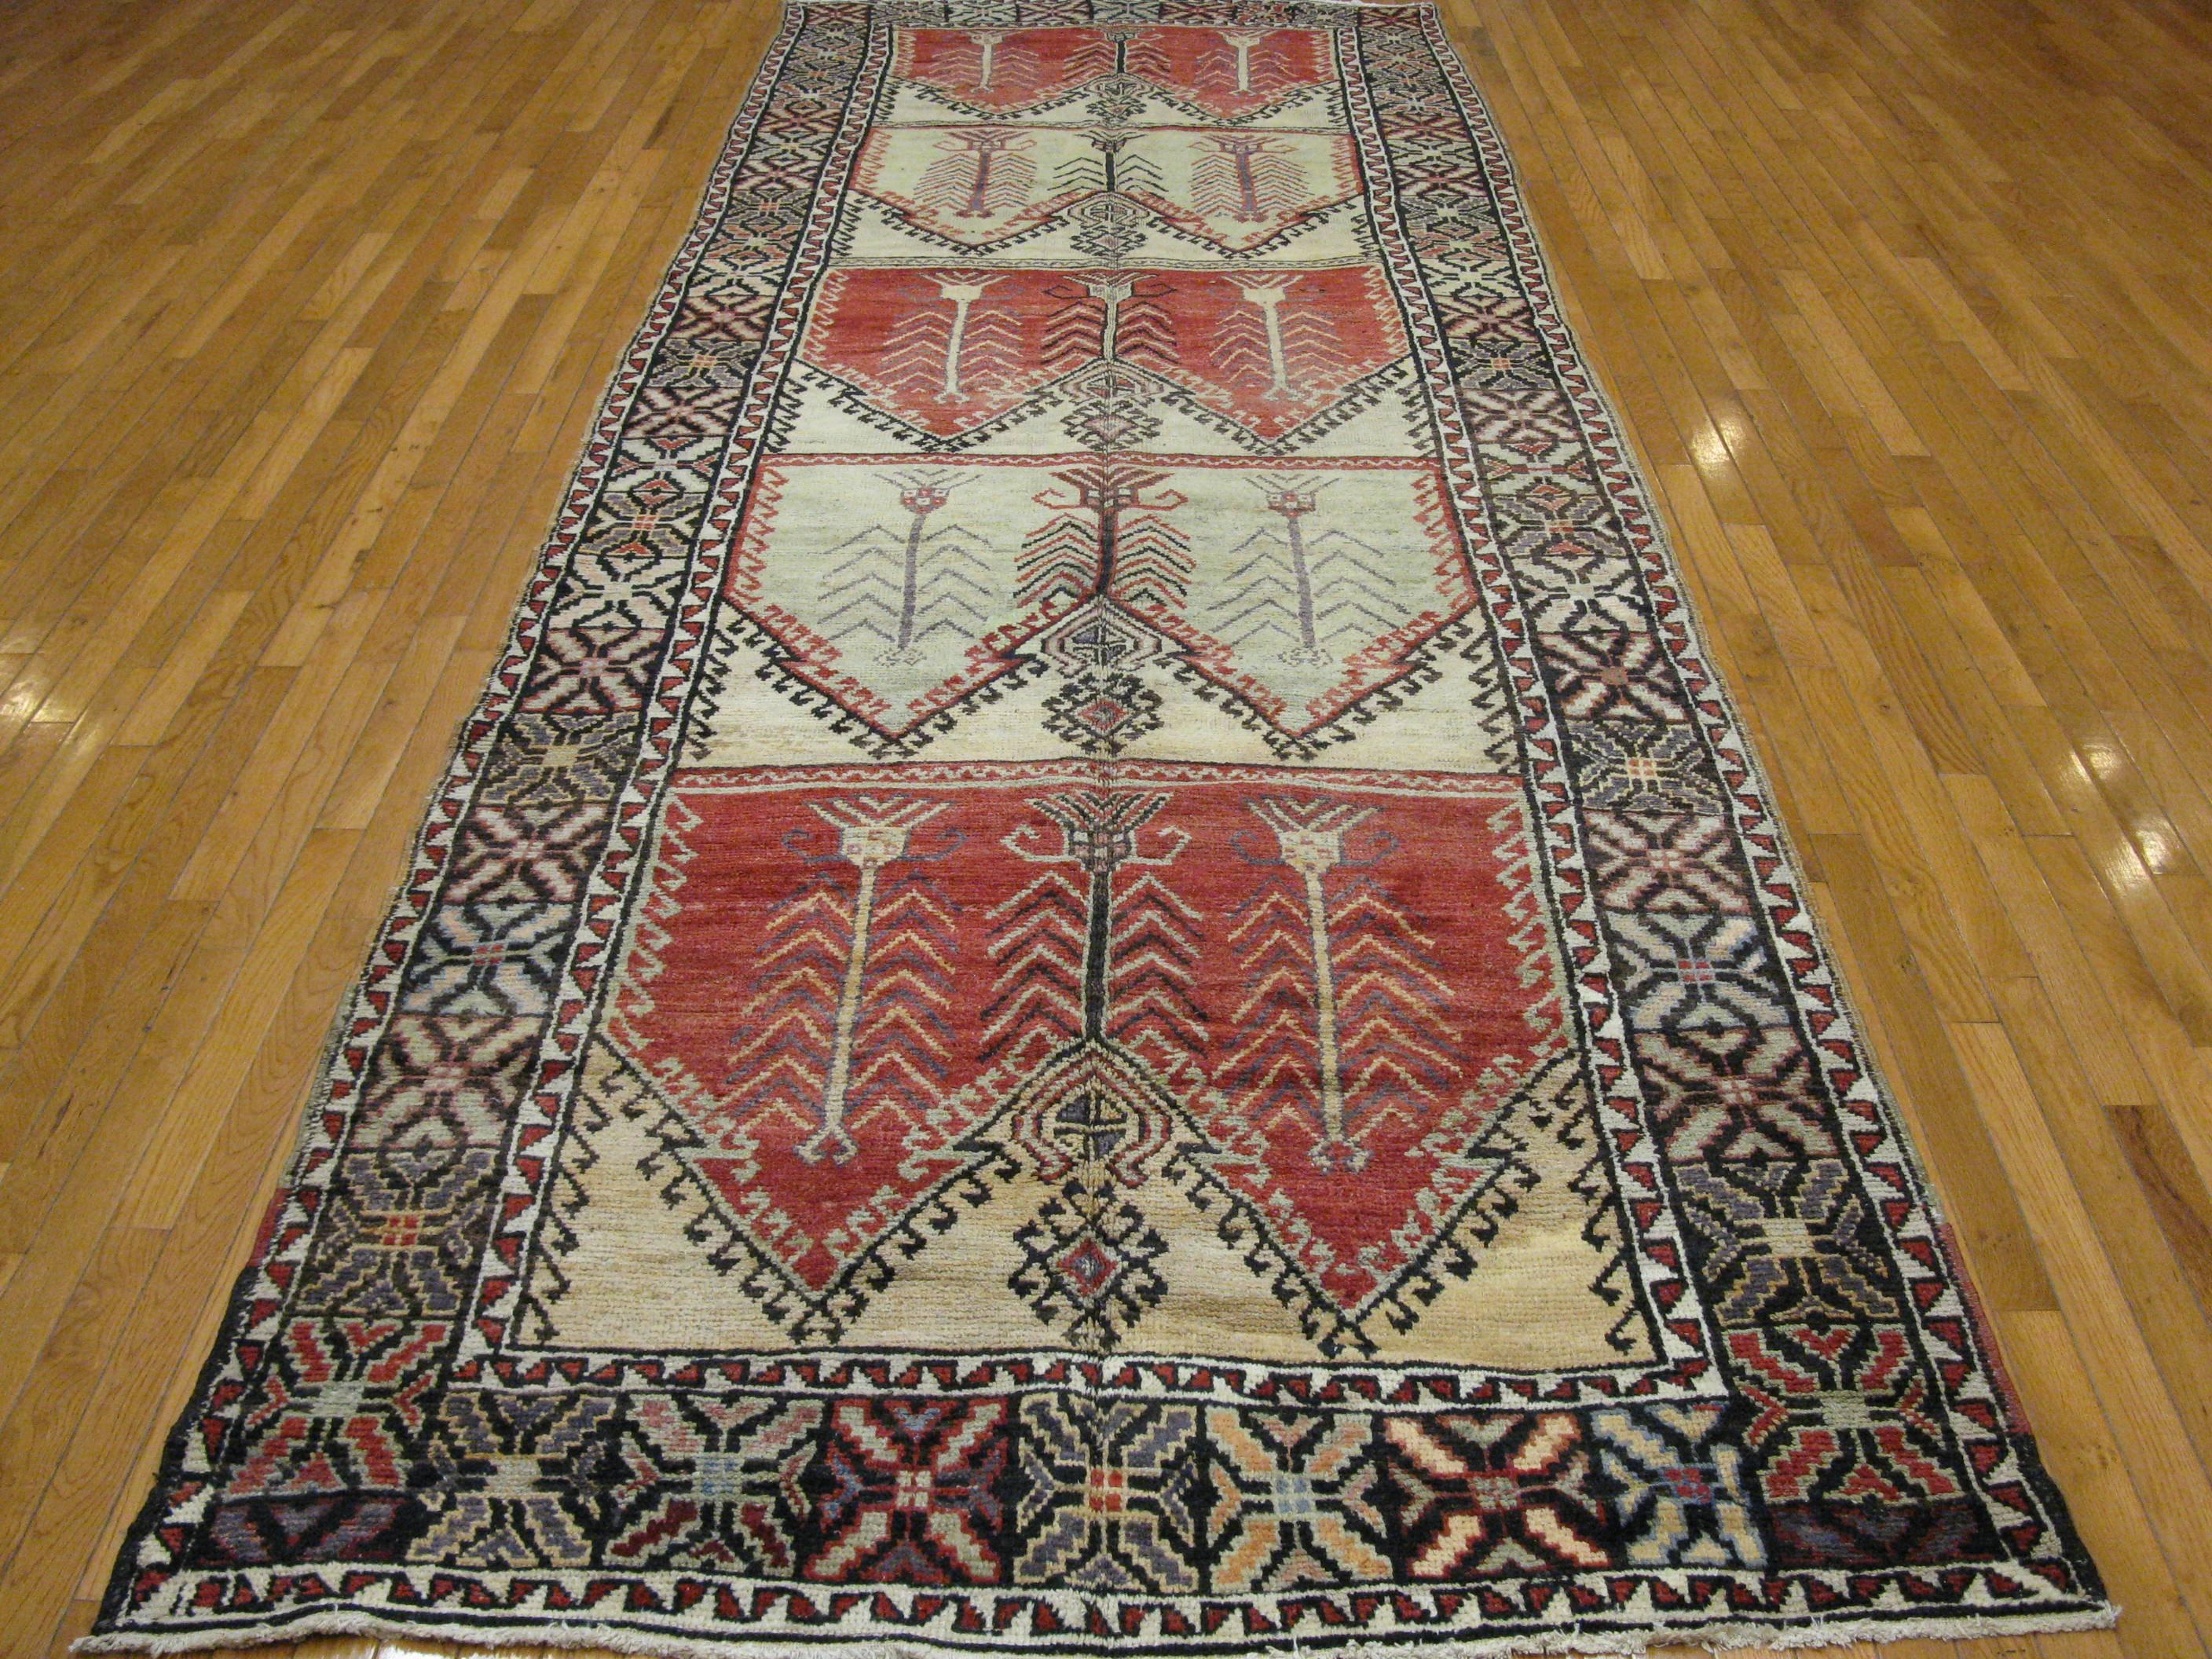 This vintage hand-knotted wool rug from Turkey would enhance any hallway.
Alternating red and ivory panels give the rug a unique look. The rug measures 4' 8'' x 14' and in very good condition.
       